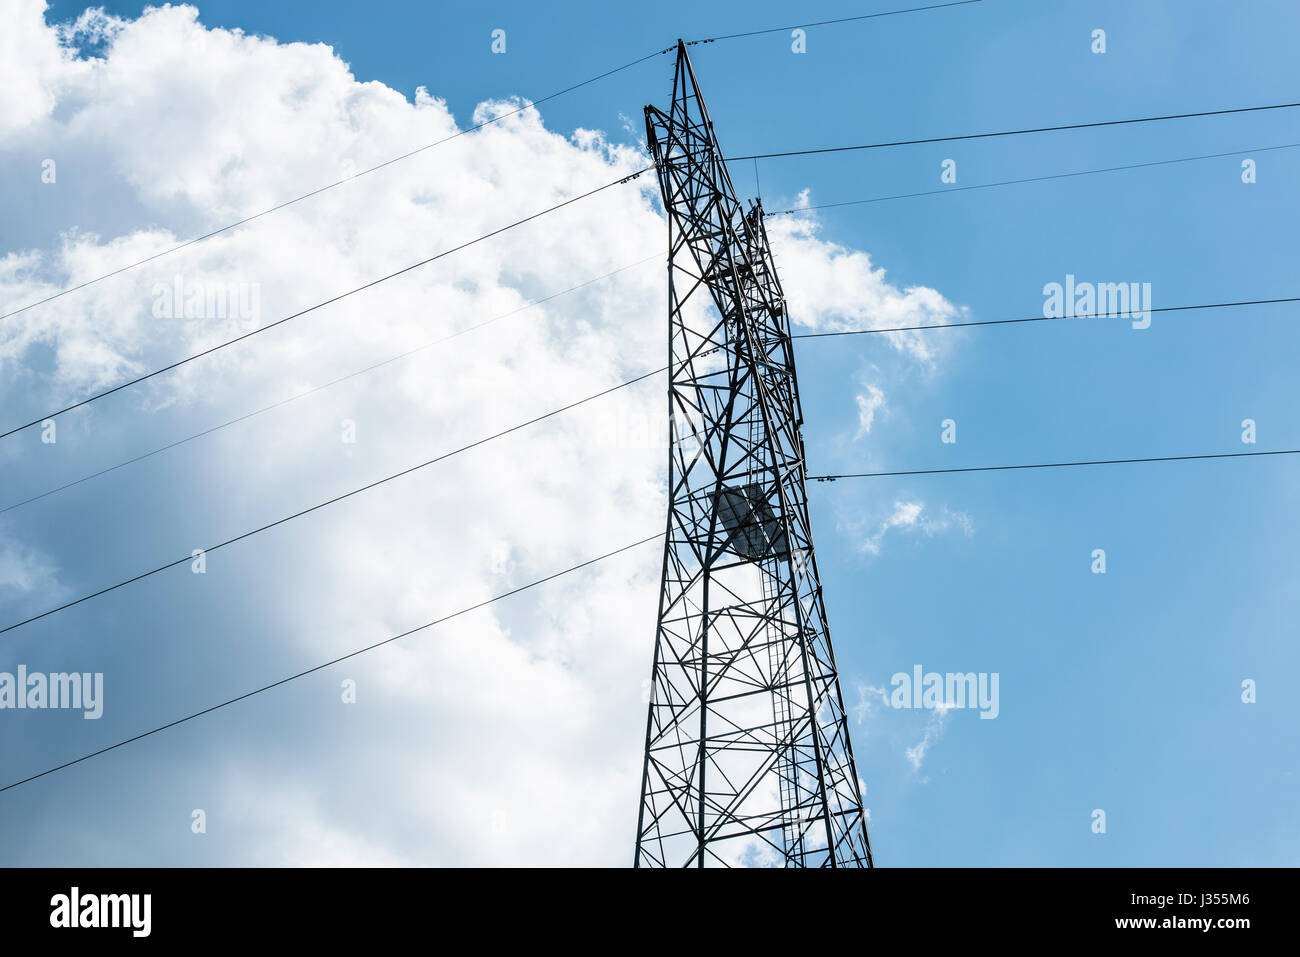 Power line tower against blue sky. Stock Photo